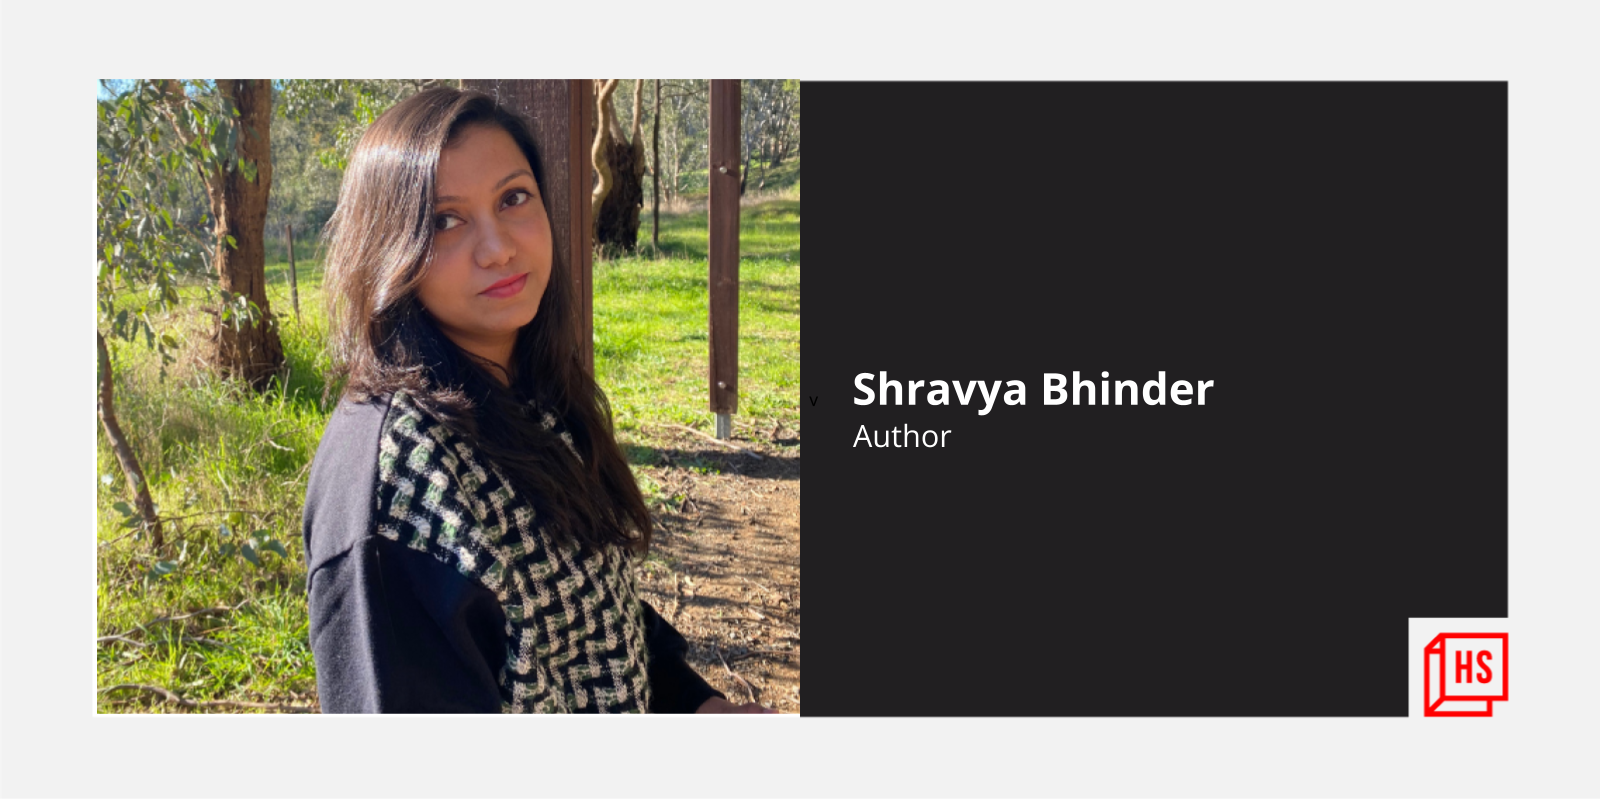 There can never be too many romance writers or too many romance novels, says best-selling author Shravya Bhinder

